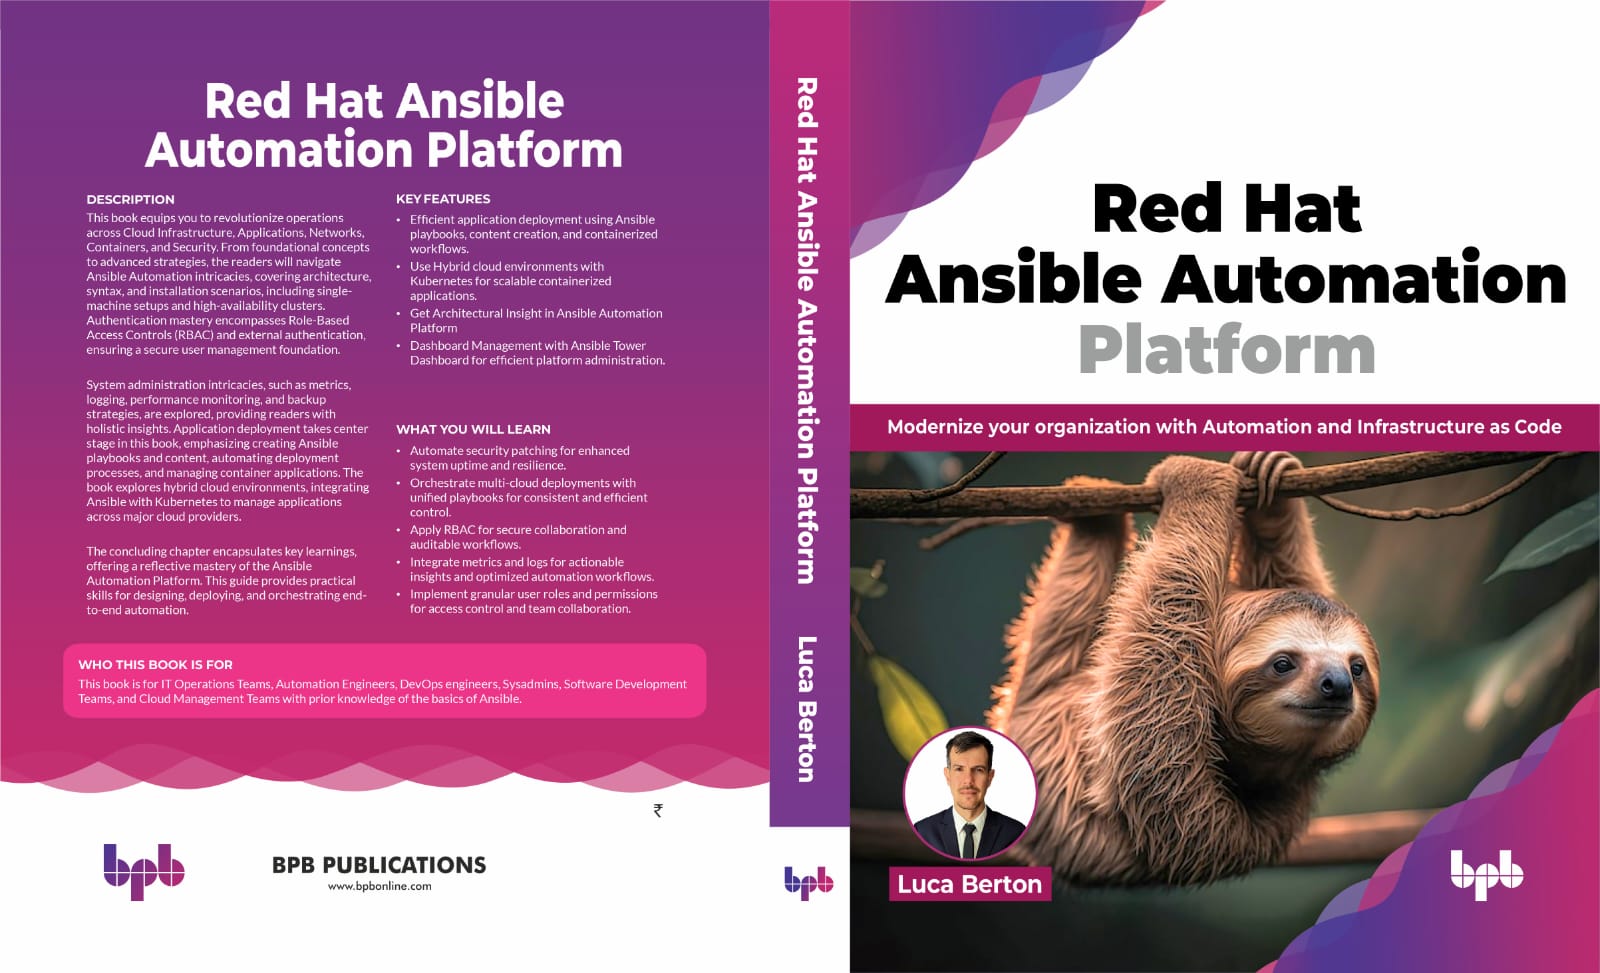 Red Hat Ansible Automation Platform book by Luca Berton